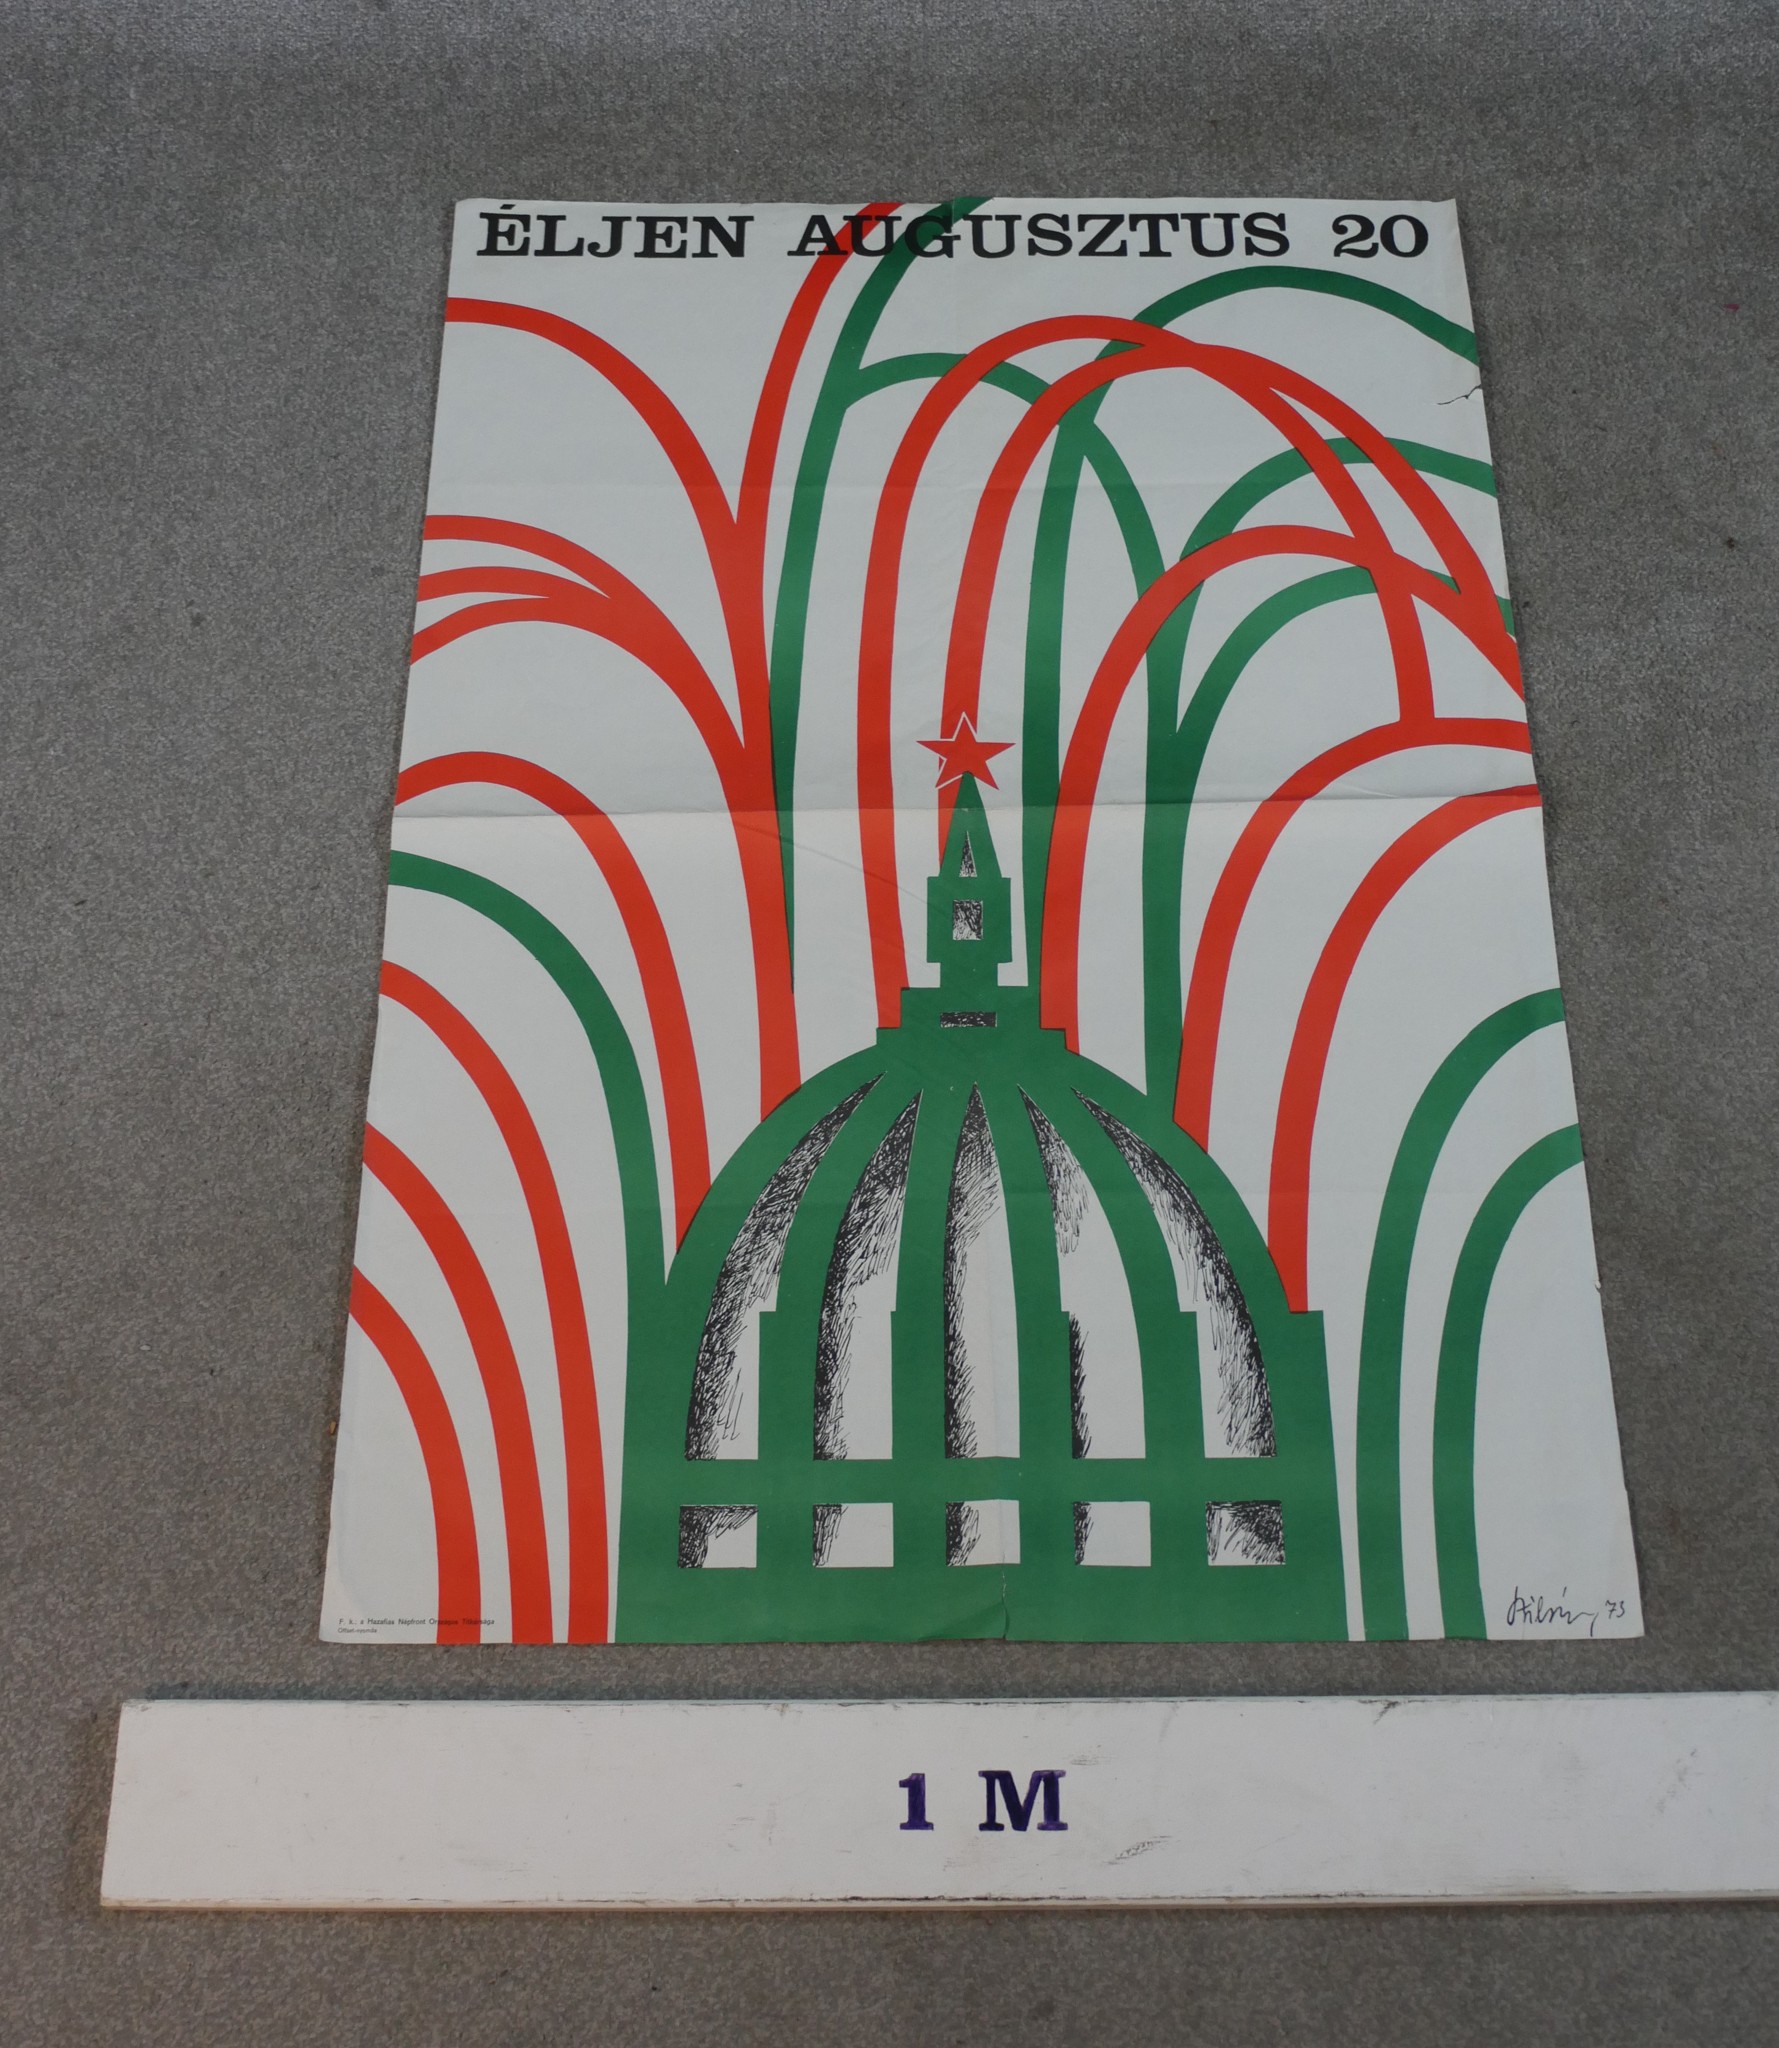 An unframed Eljen Augusztus 20 poster in association from the Patriotic Peoples Front in Hungary. - Image 2 of 4